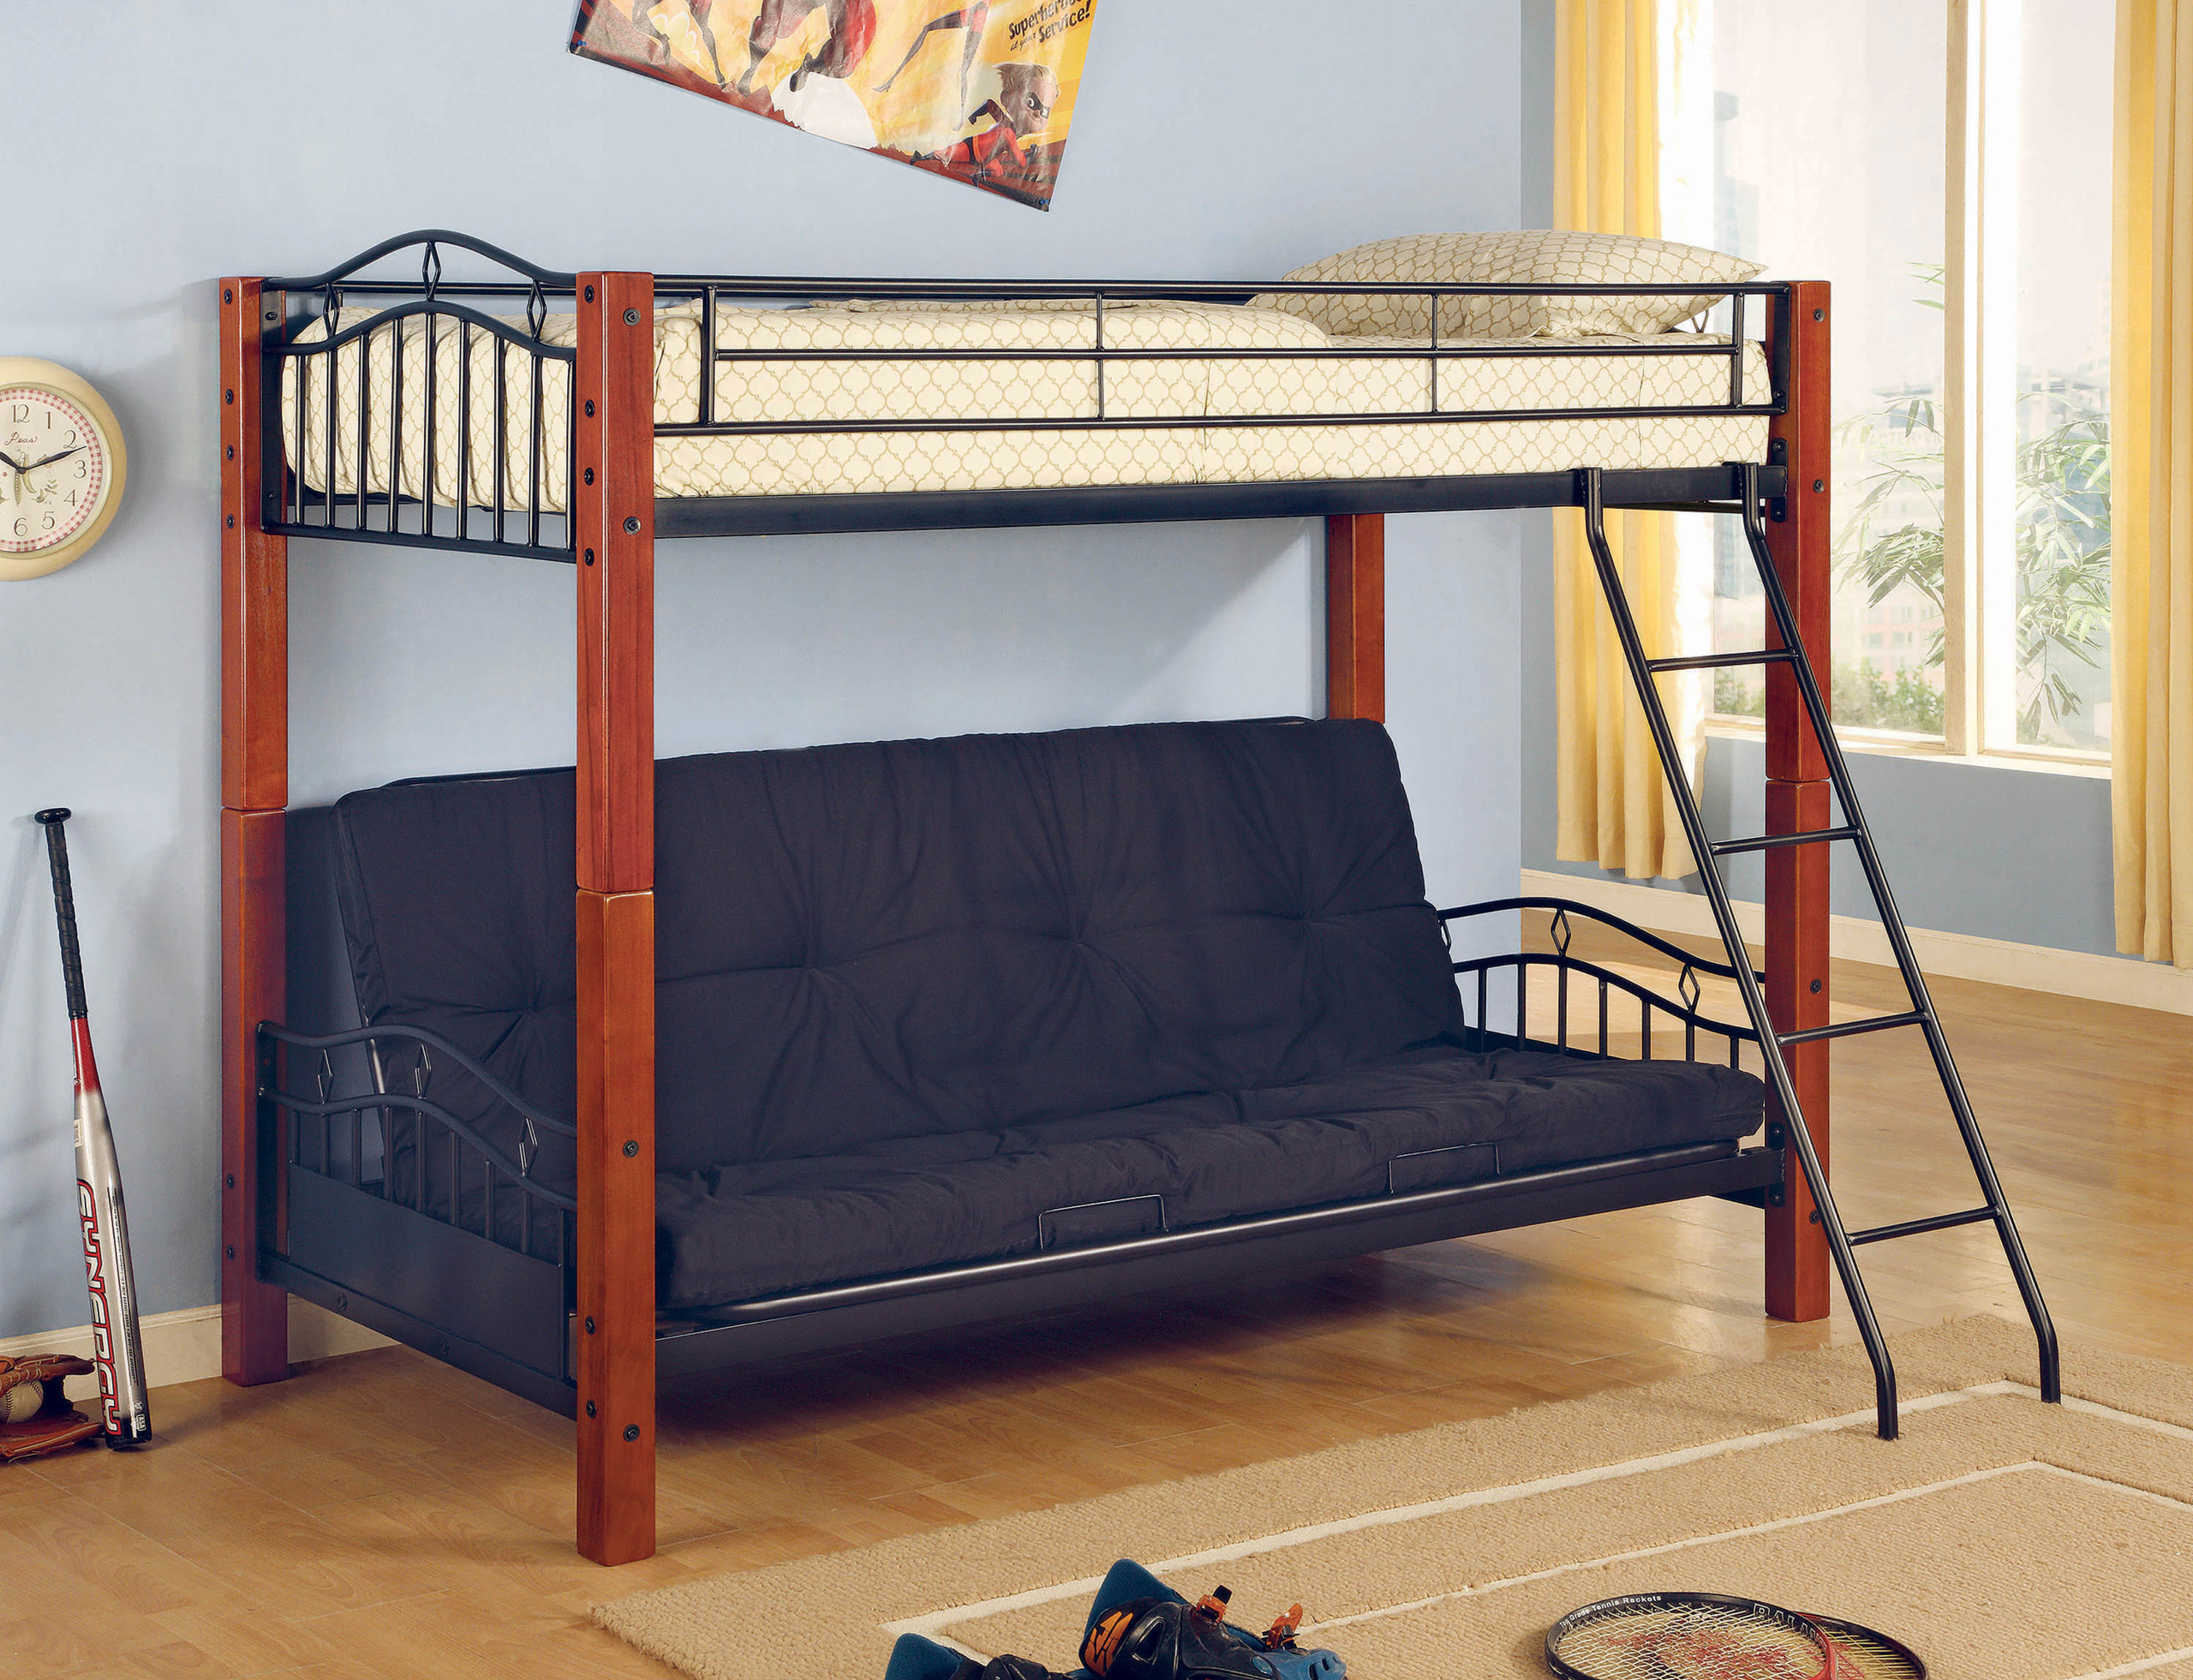 Full Over Futon Bunk Bed Visualhunt, White Wood Futon Bunk Bed